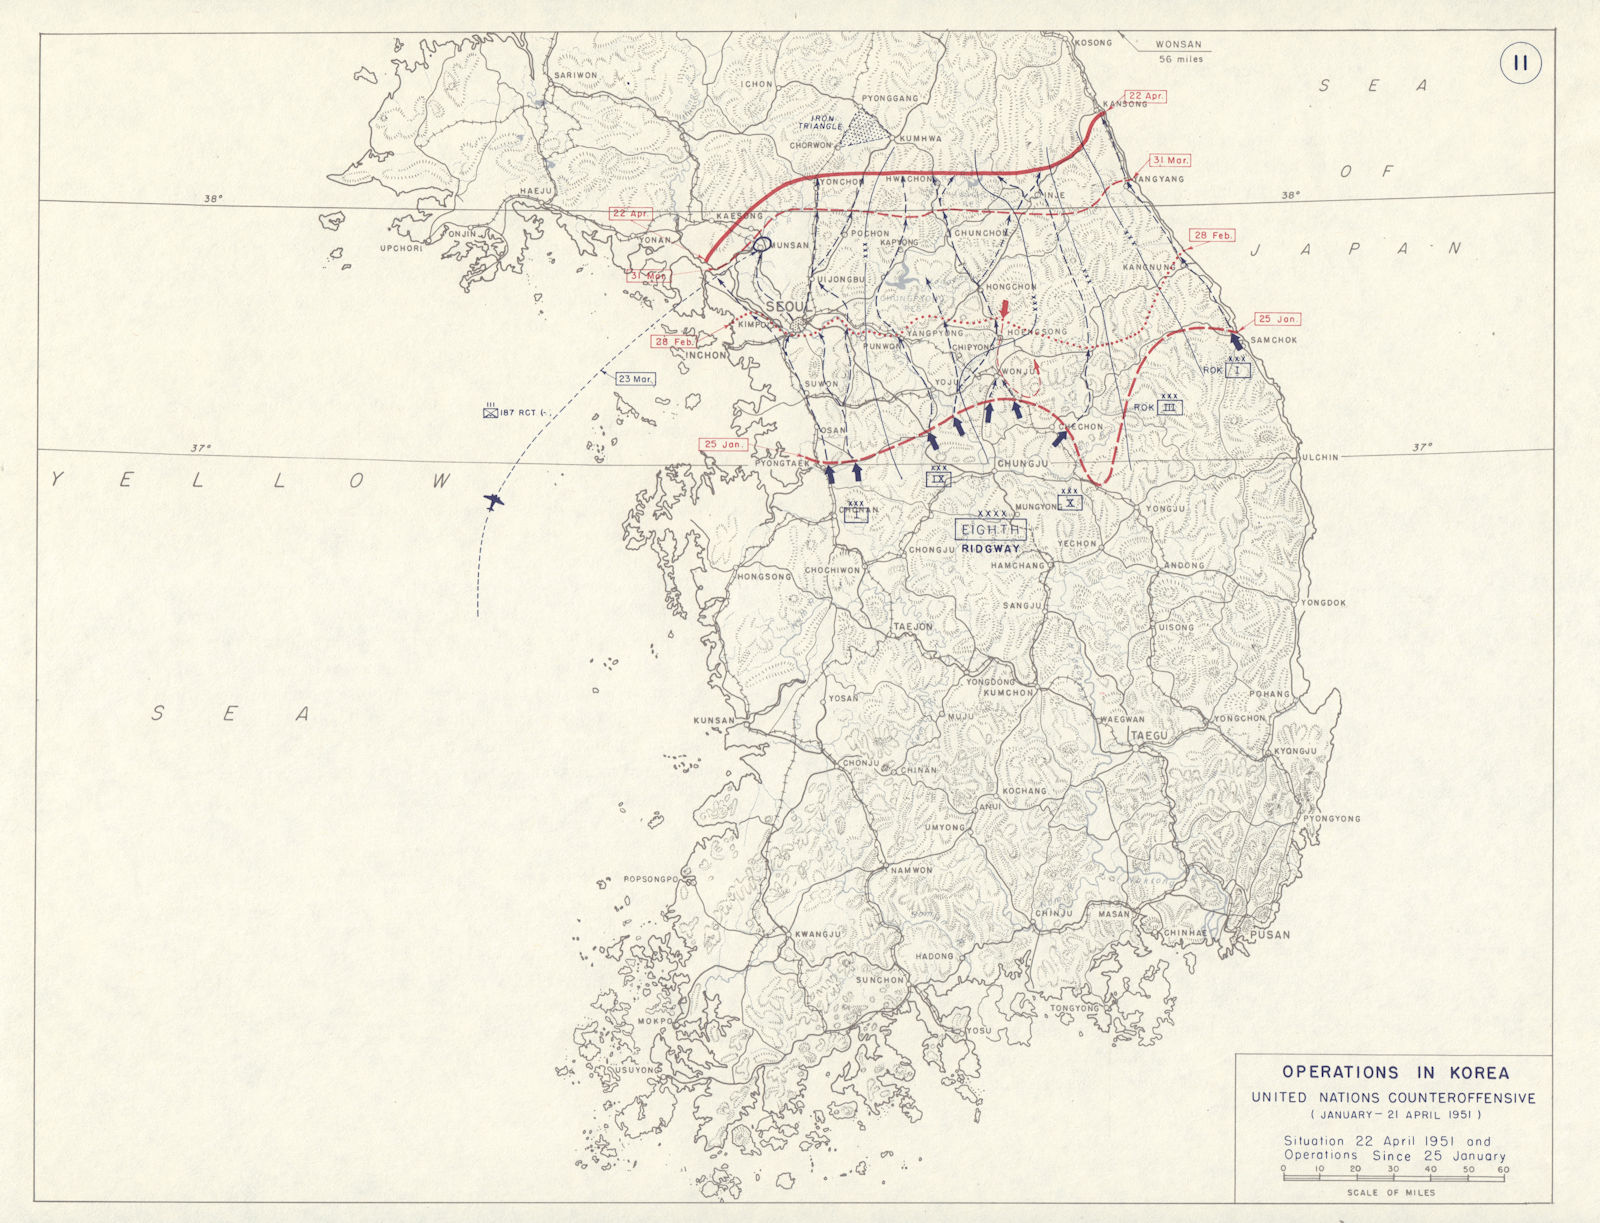 Korean War. 25 January-21 April 1951. United Nations Counter Offensive 1959 map